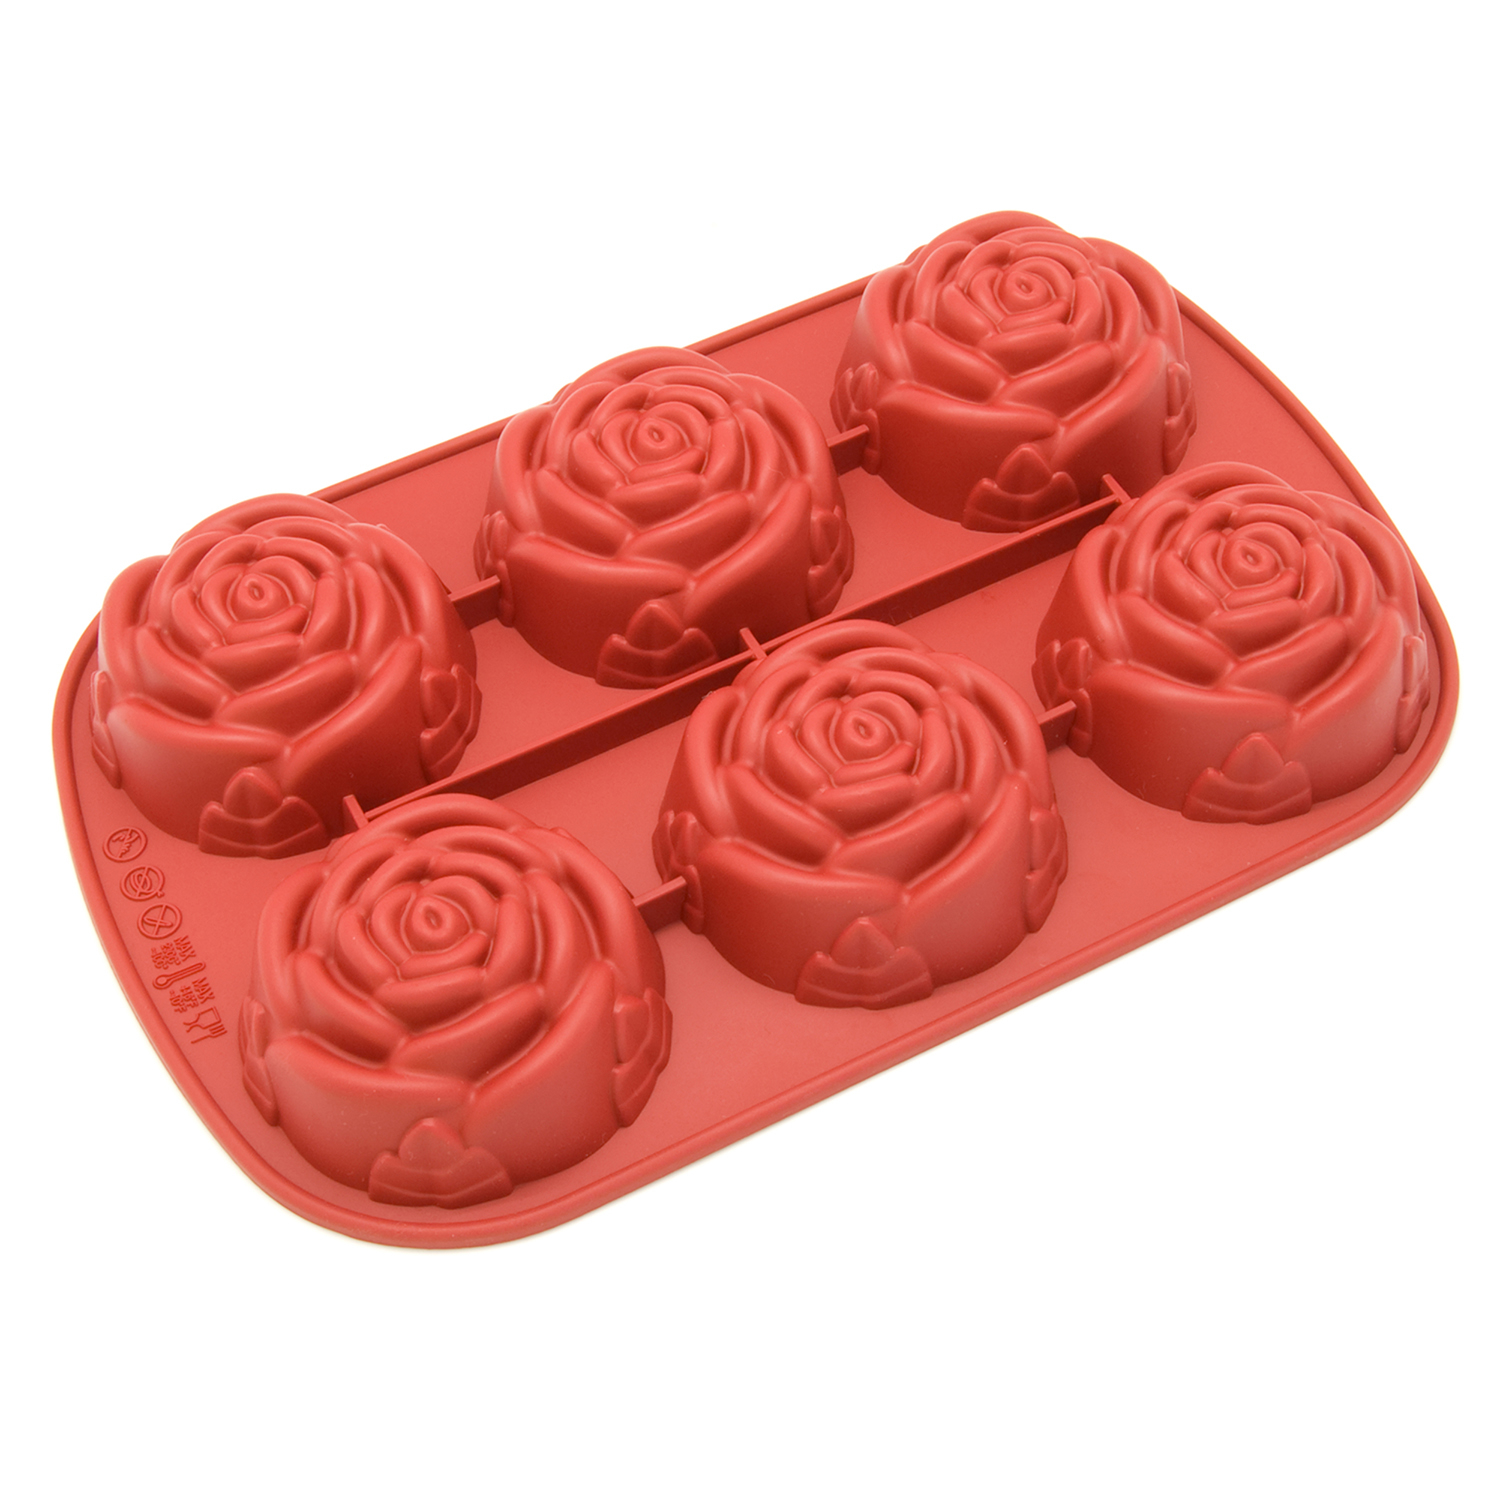 Freshware Silicone Mold, Soap Mold for Pudding, Muffin, Cupcake, Cheesecake and Soap, Rose, 6-Cavity